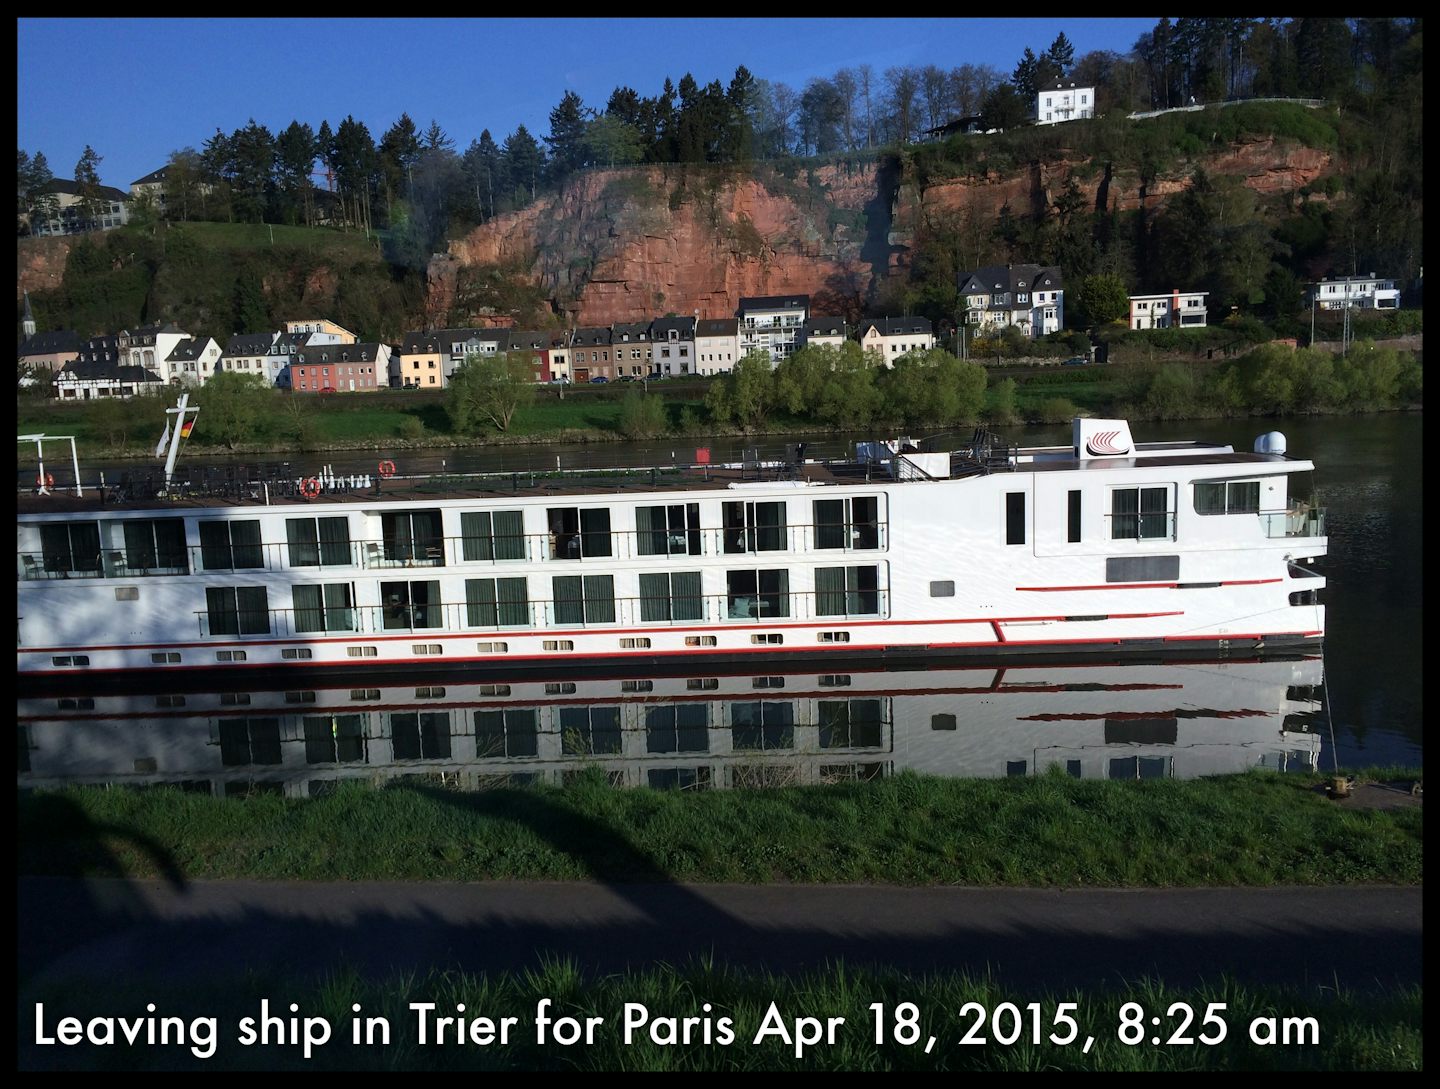 Saying good bye to the ship in Trier as we disembarked to visit Luxemburg